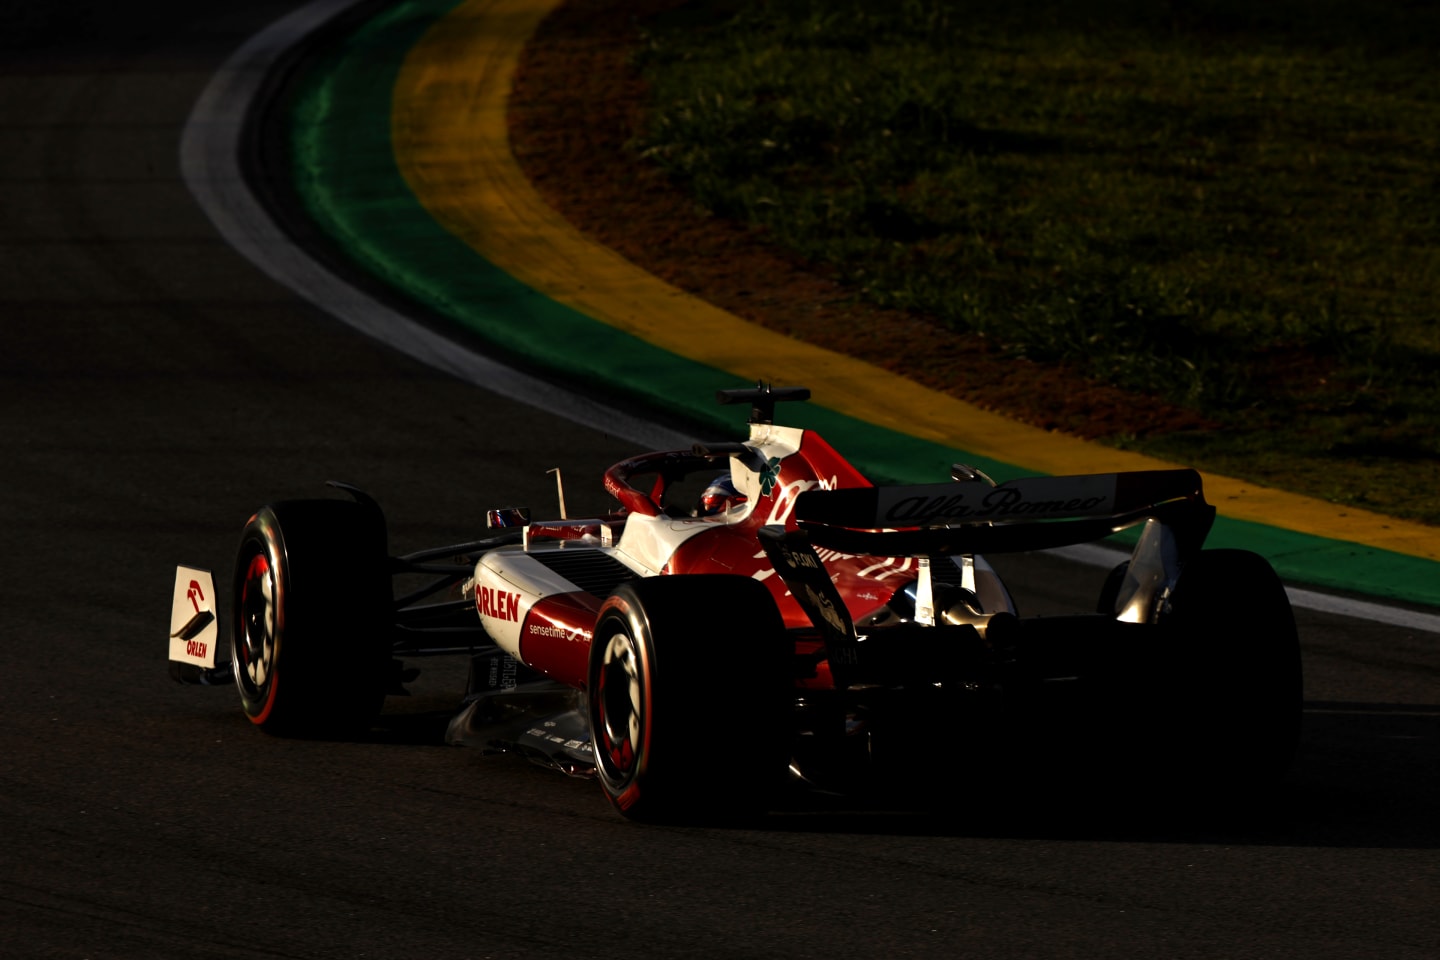 SAO PAULO, BRAZIL - NOVEMBER 12: Valtteri Bottas of Finland driving the (77) Alfa Romeo F1 C42 Ferrari on track during the Sprint ahead of the F1 Grand Prix of Brazil at Autodromo Jose Carlos Pace on November 12, 2022 in Sao Paulo, Brazil. (Photo by Chris Graythen/Getty Images)